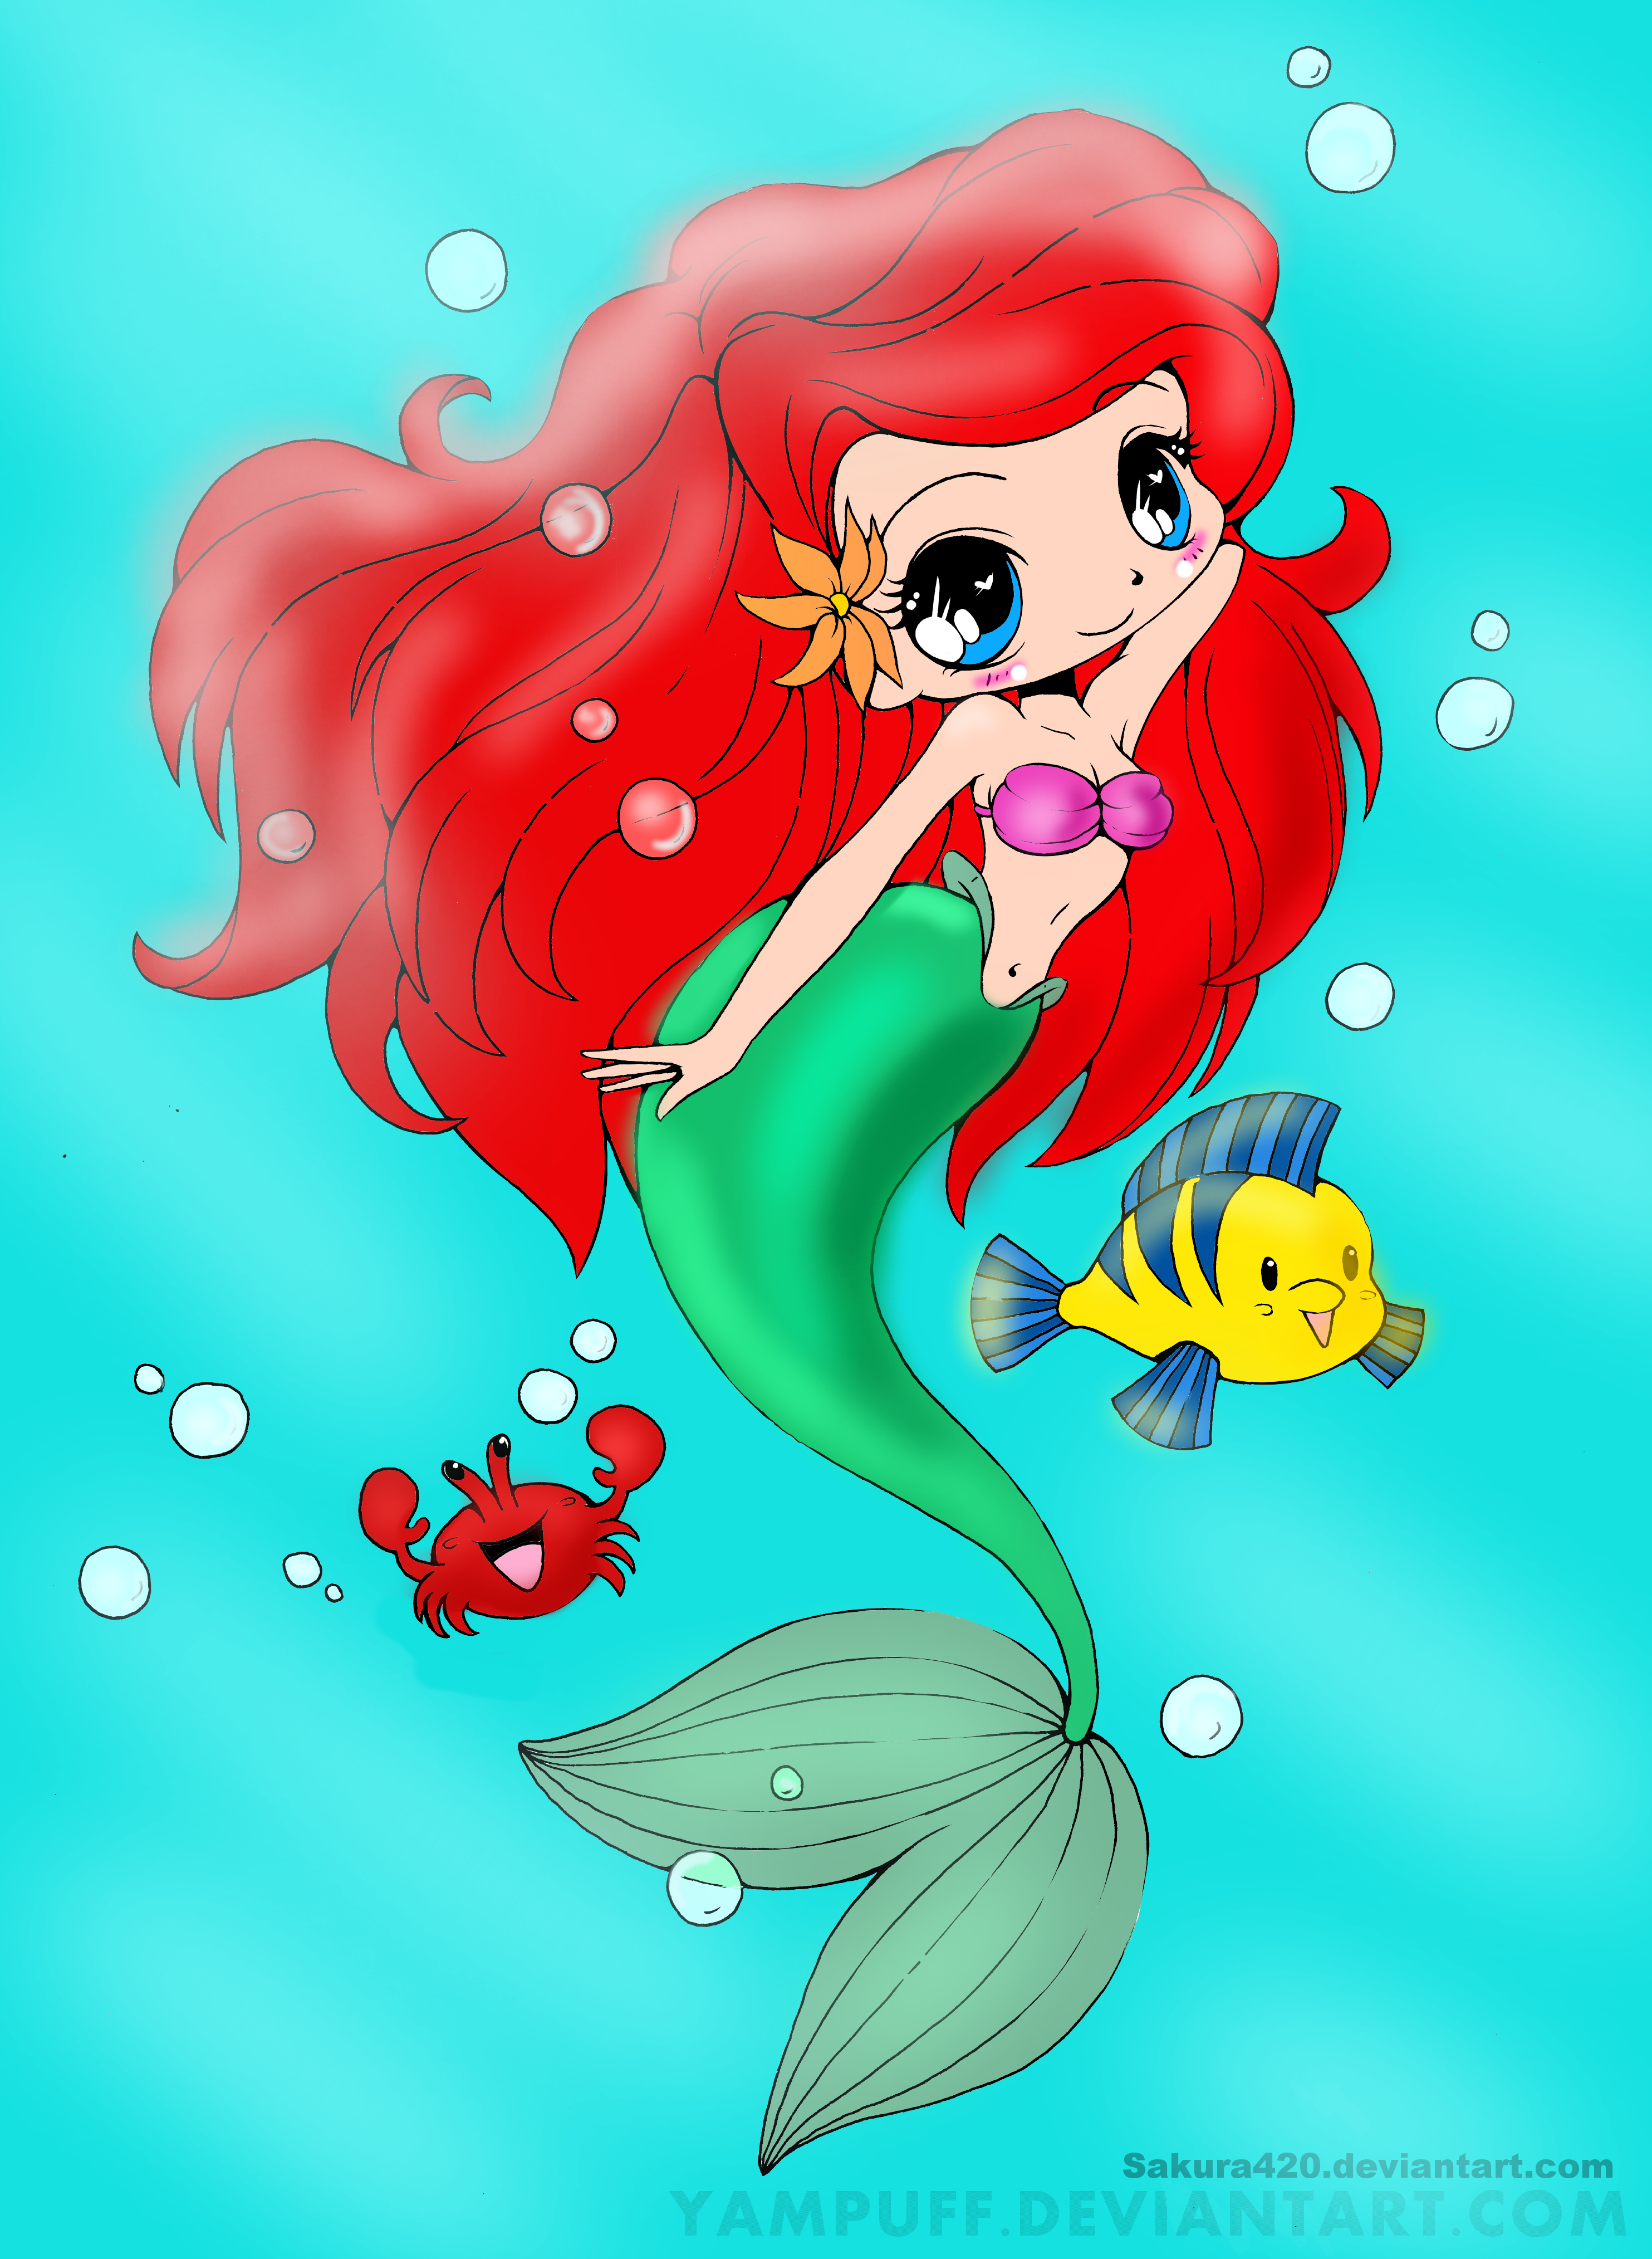 Anime BFF Drawings Ariel the little mermaid by pink-marshmallows on deviantart